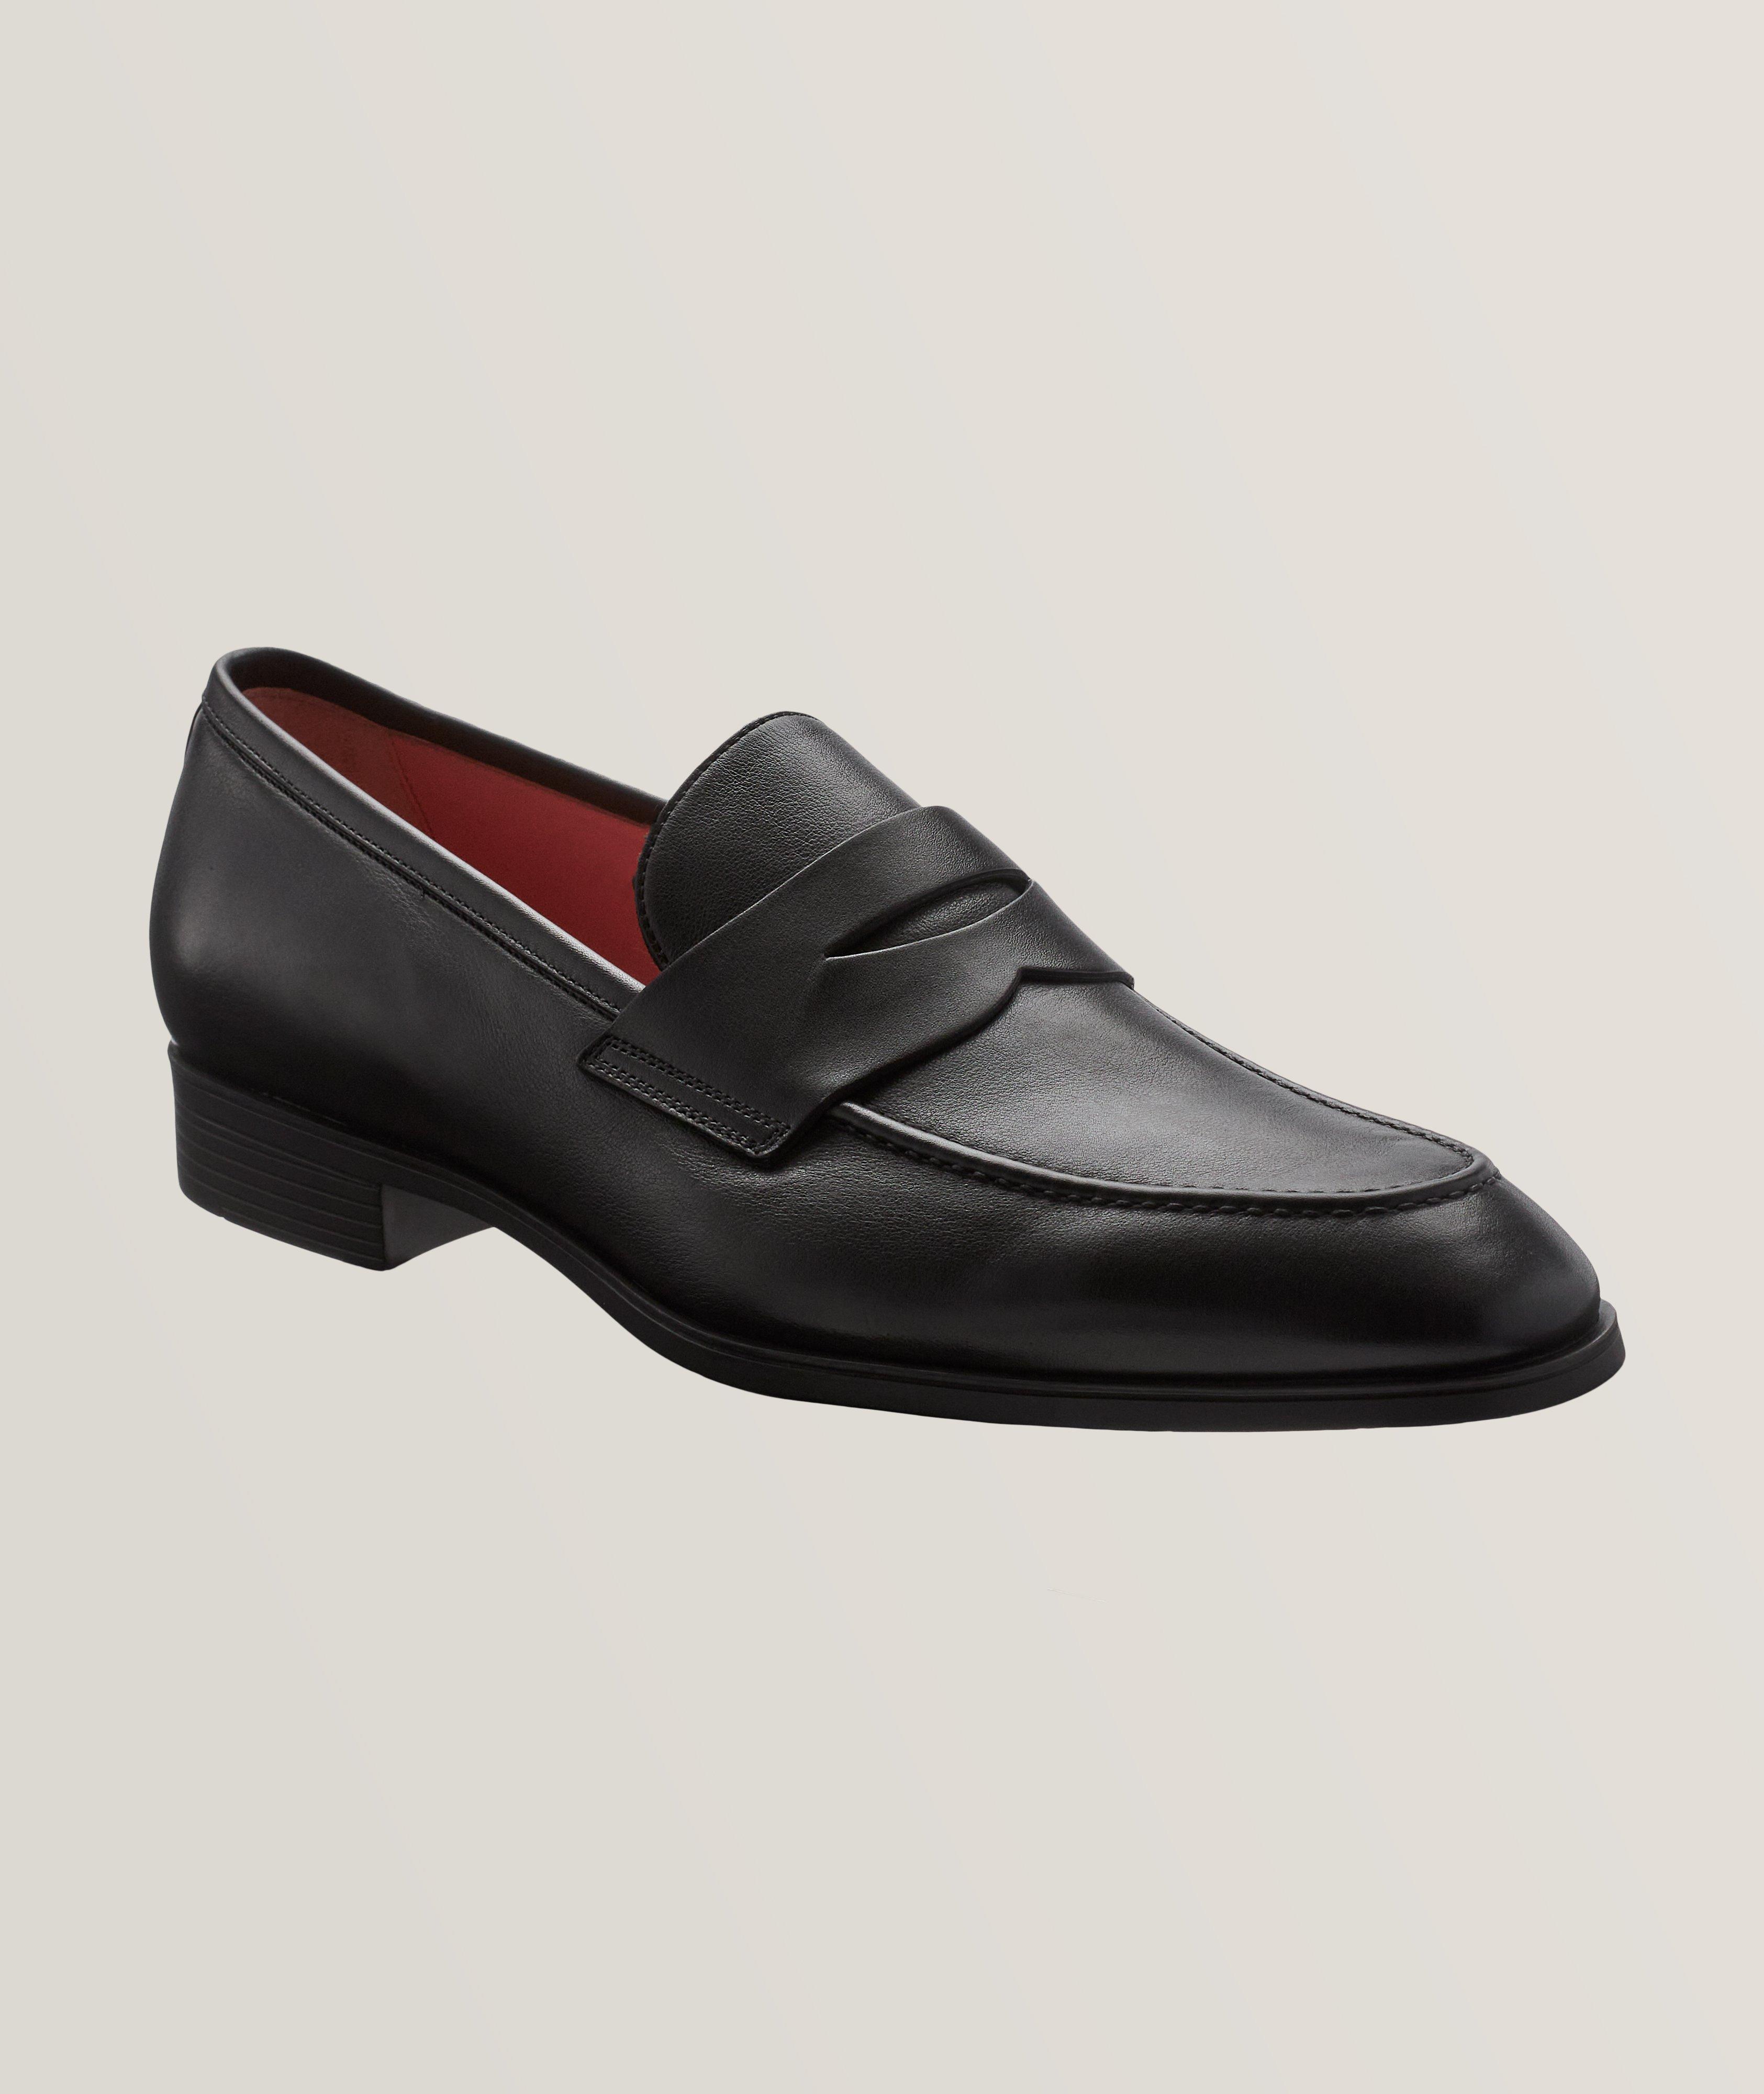 Simon Leather Penny Loafers image 0